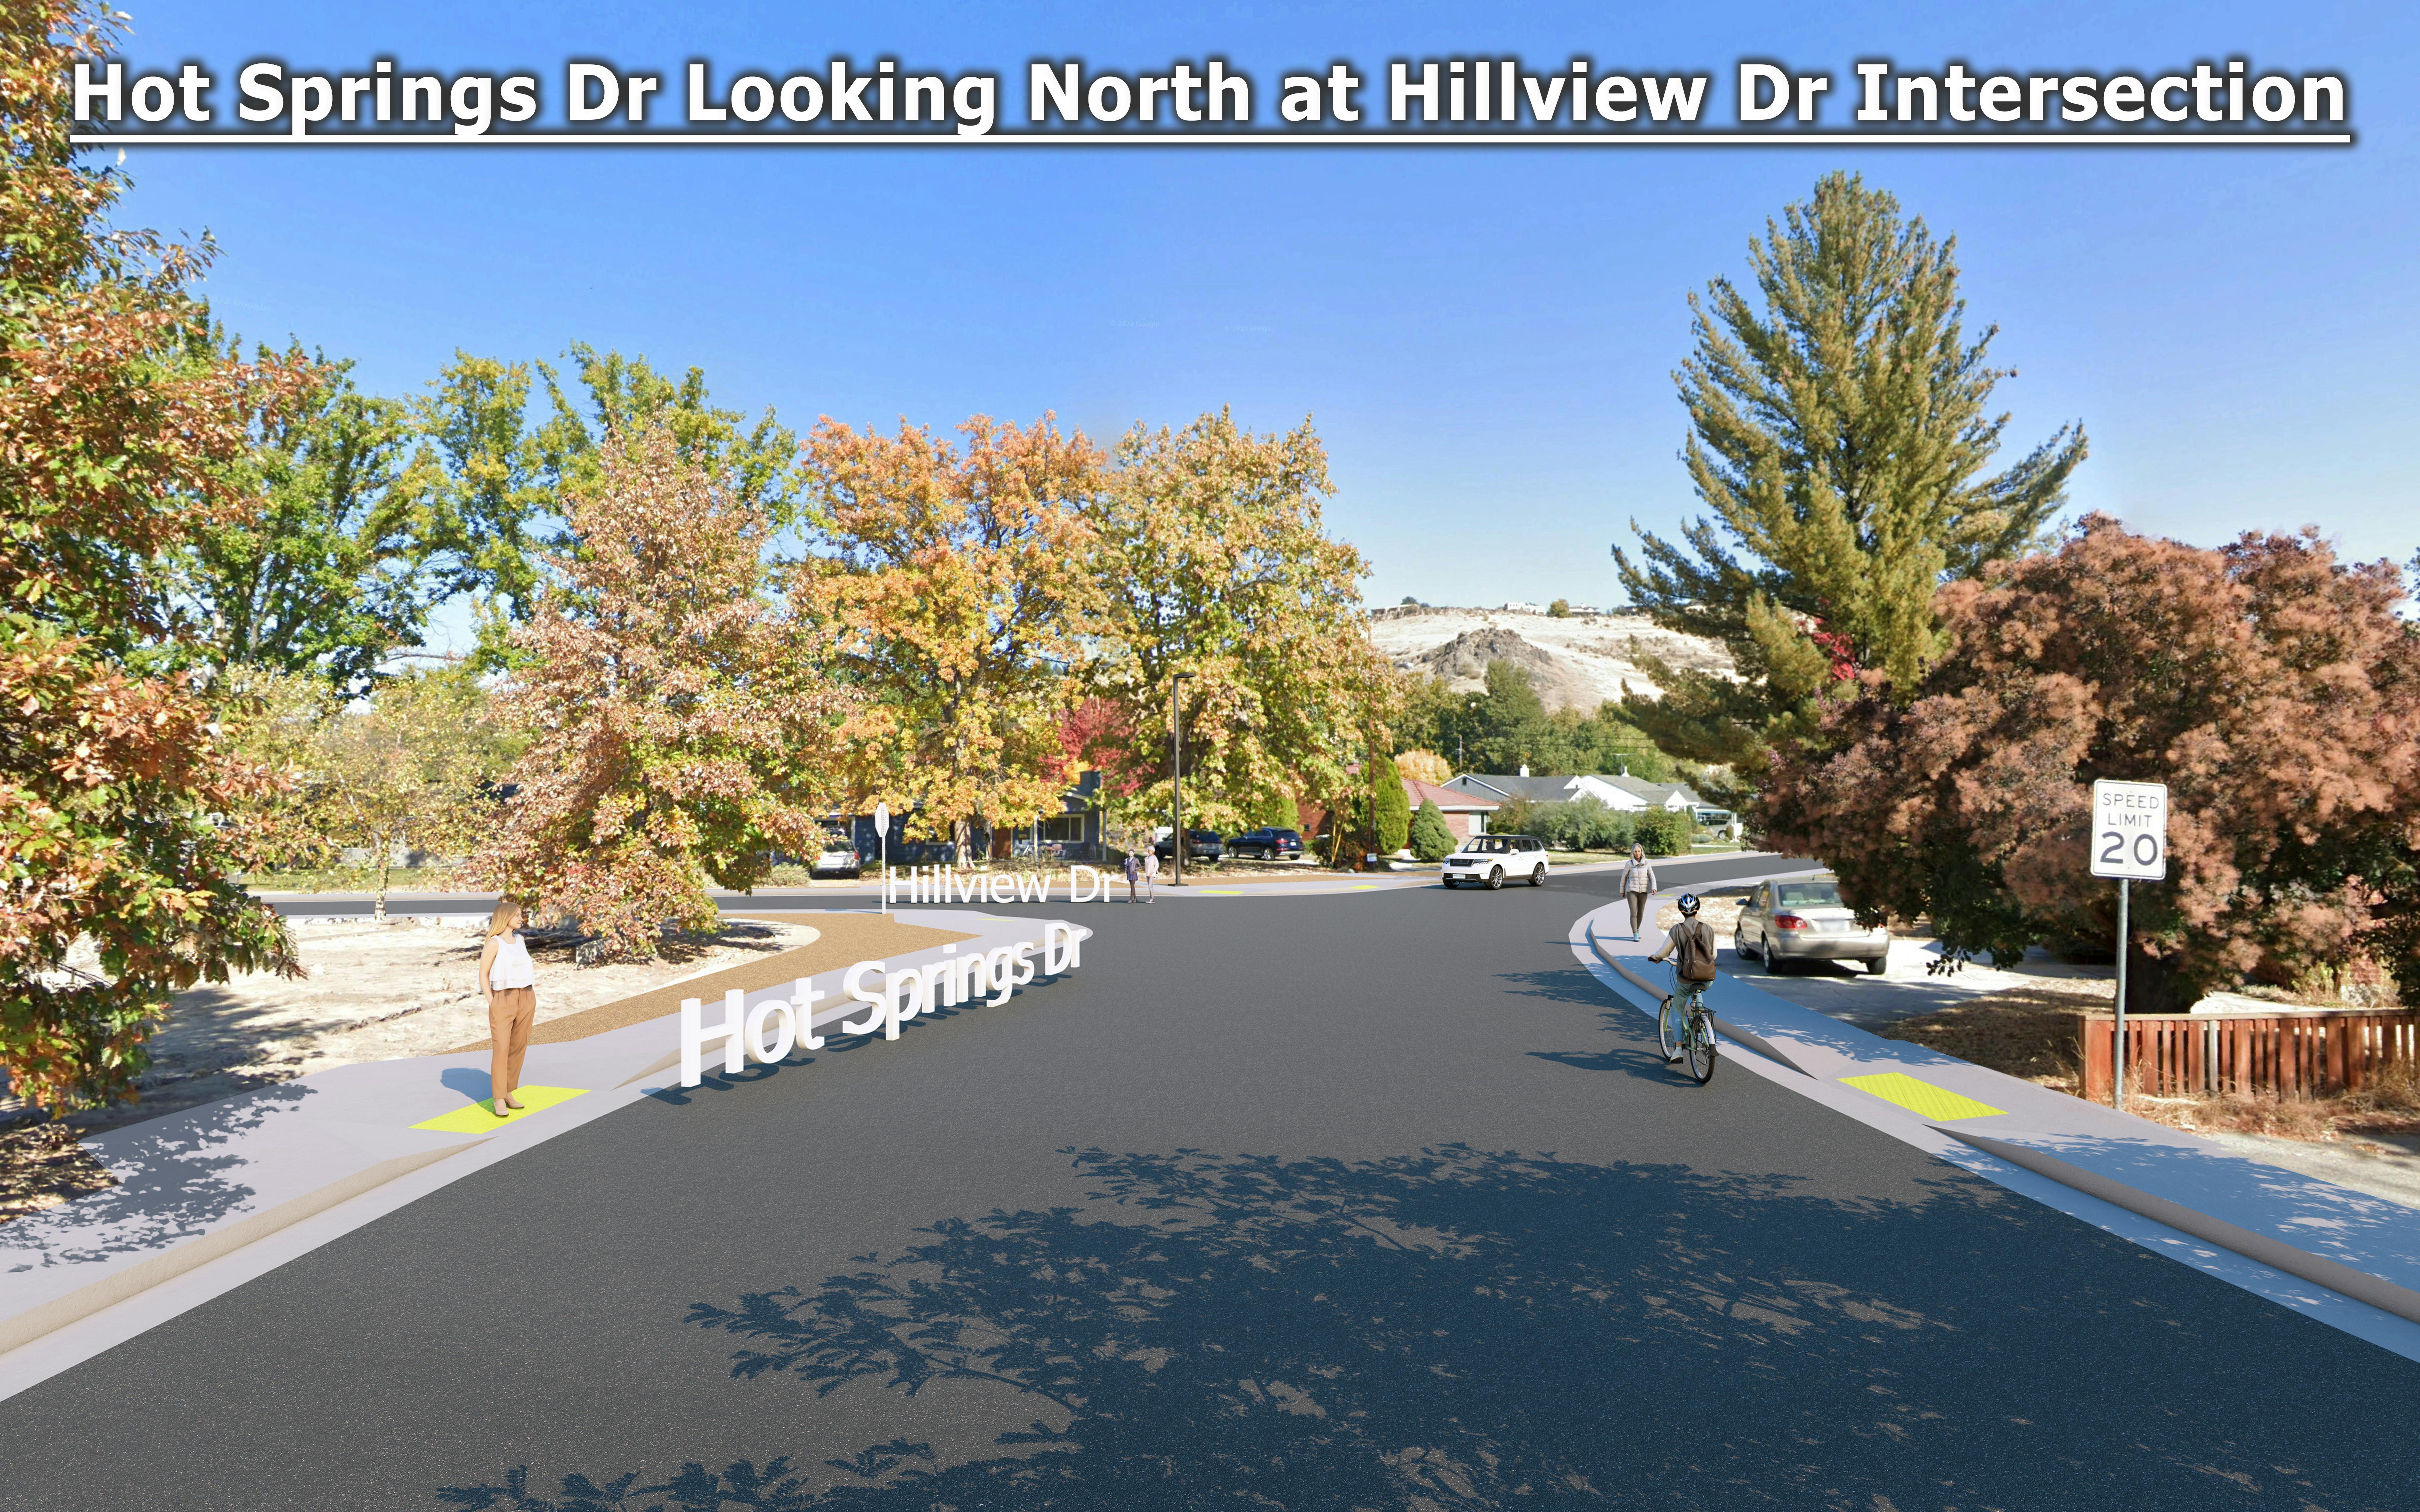 Hotsprings and Hillview Intersection North streetview.jpg